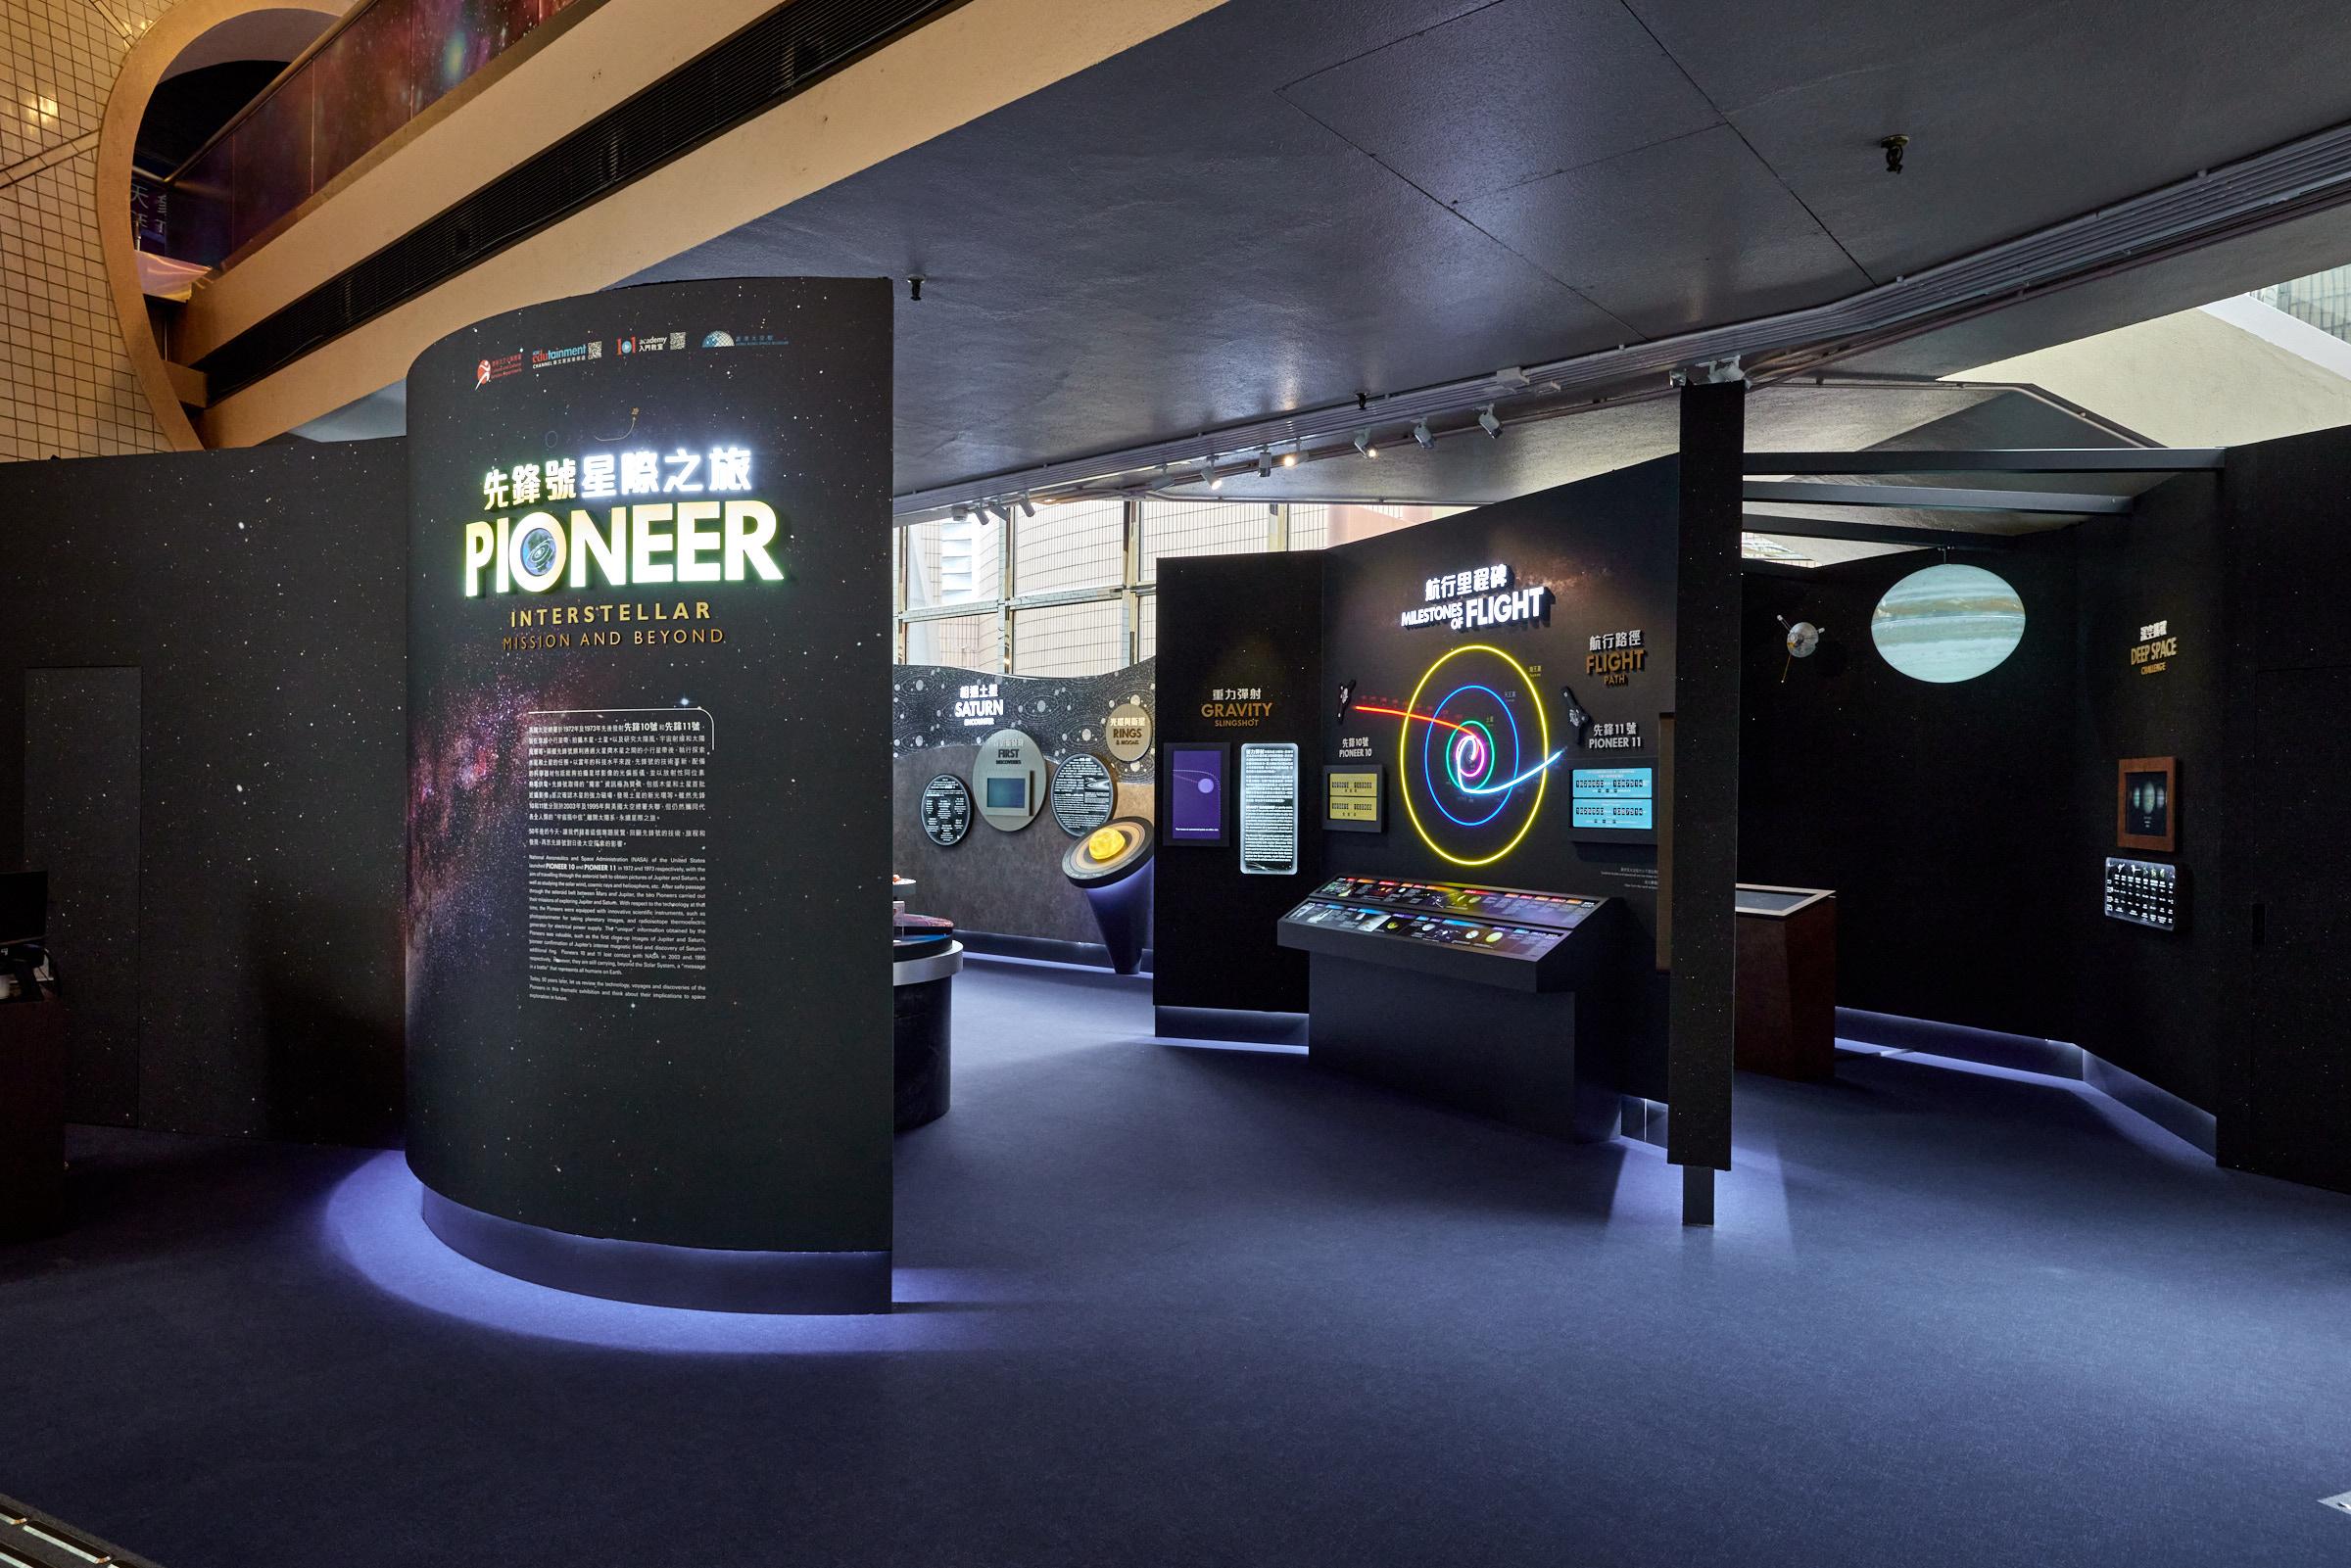 The Hong Kong Space Museum will launch a new thematic exhibition, "The Pioneer Interstellar Mission and Beyond", tomorrow (October 26) to introduce two spacecraft, Pioneer 10 and 11, which were launched in the 1970s. 

